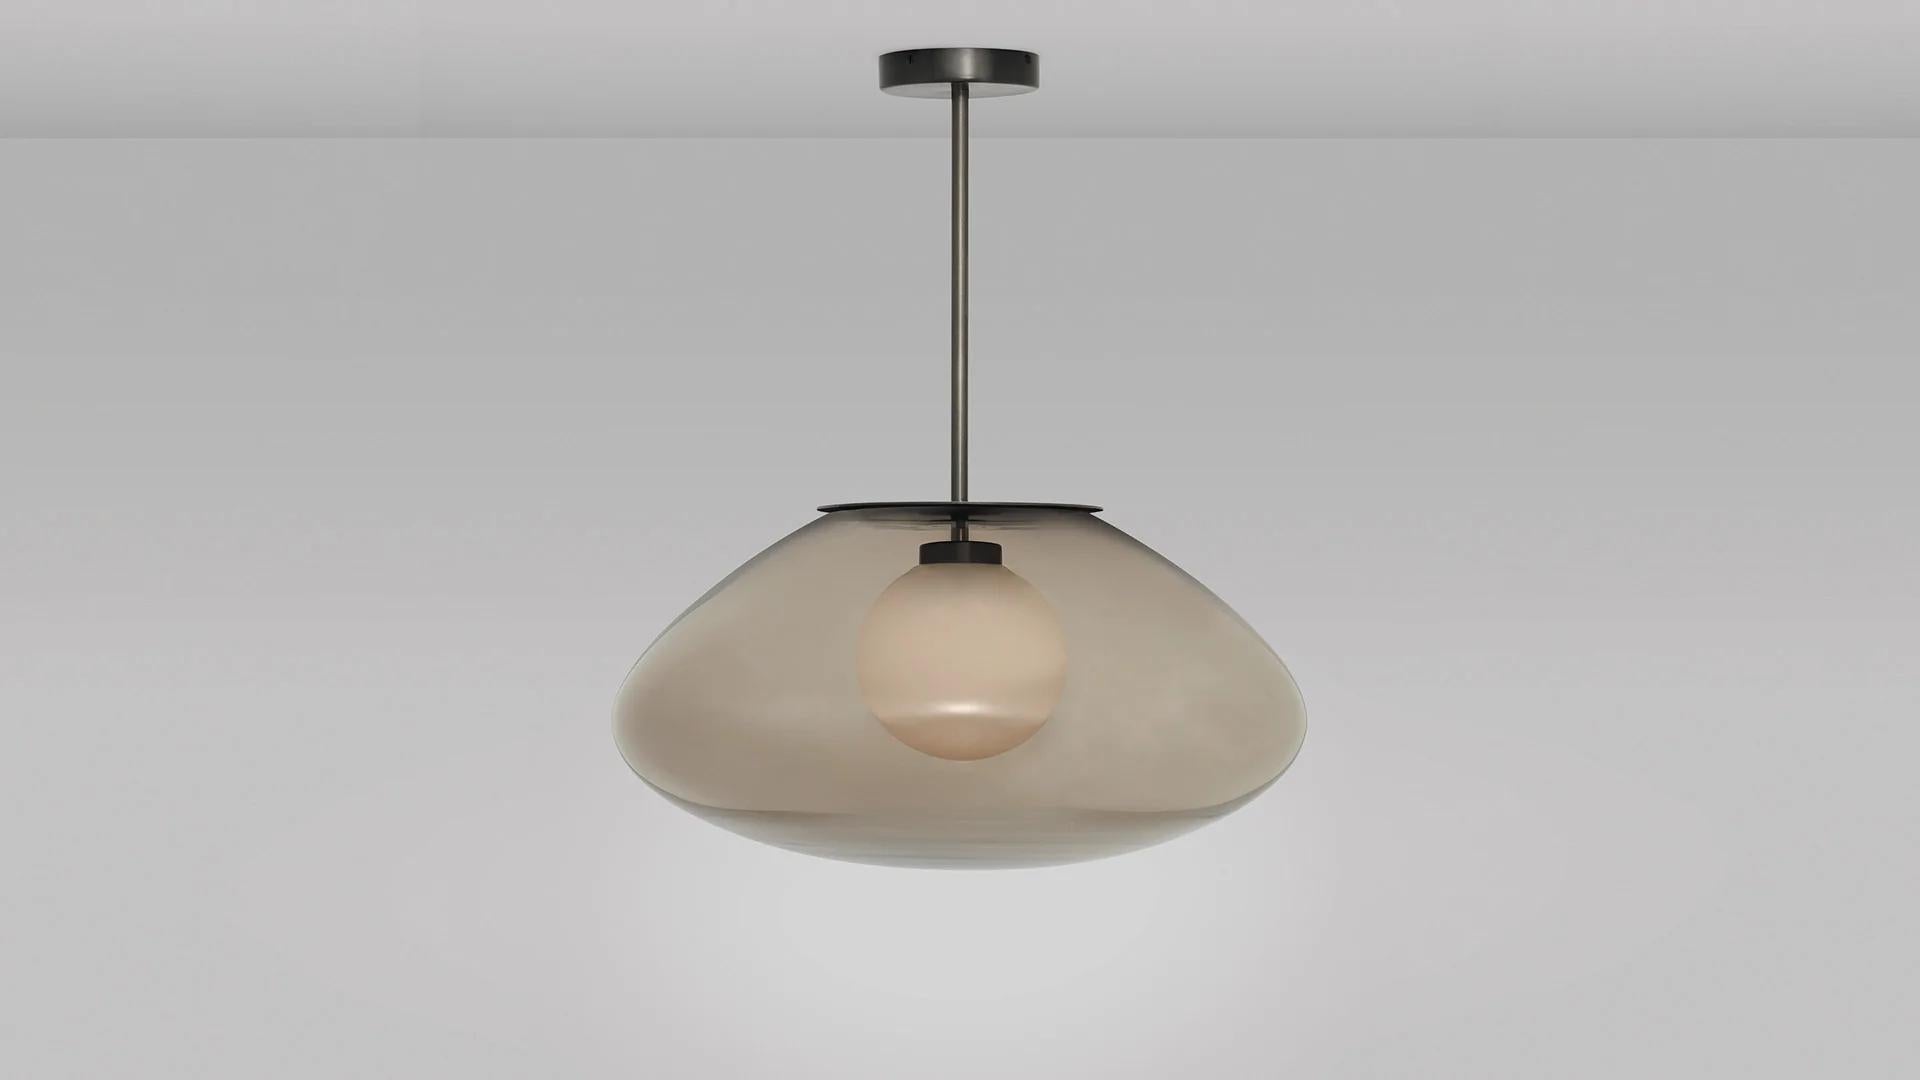 Petra small pendant by CTO Lighting.
Materials: dark bronze brass with smoked glass shade and white opal glass inner shade.
Also available in satin with smoked glass shade and hand shaped smoked glass inner shade,
satin brass with smoked glass